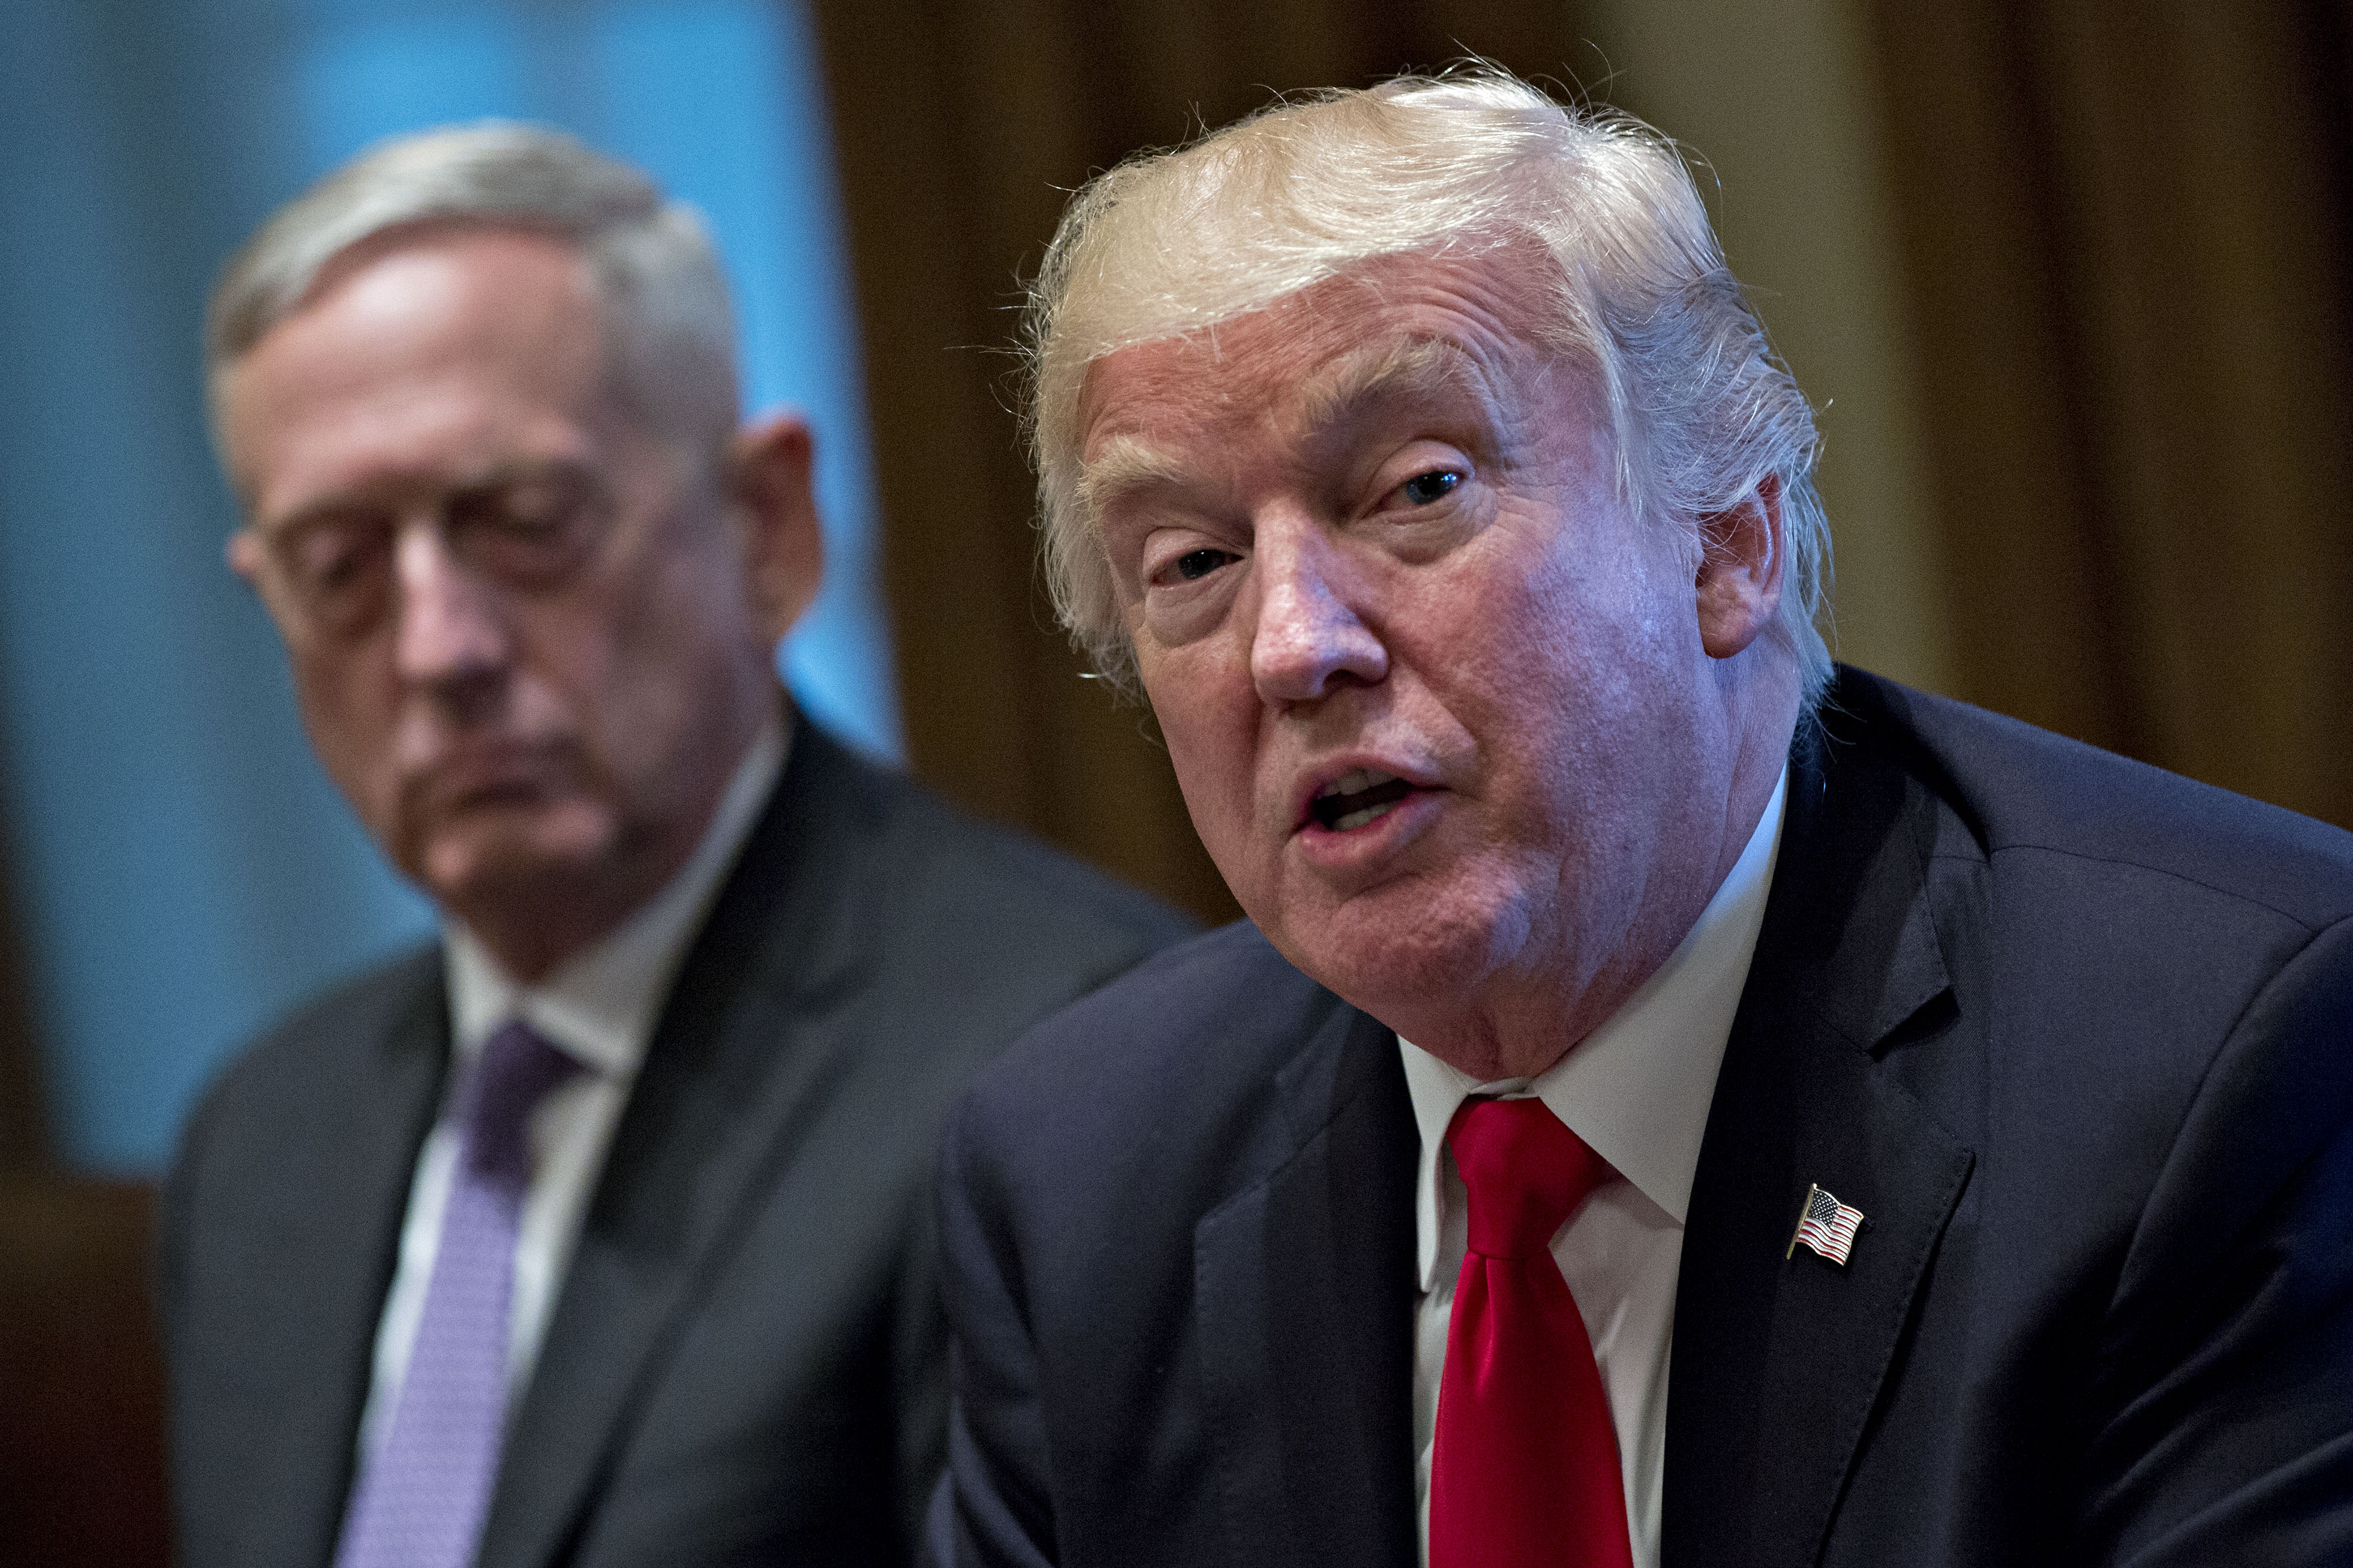 U.S. President Donald Trump speaks at a briefing with senior military leaders including Defense Secretary Jim Mattis (L) in the Cabinet Room of the White House October 5, 2017 in Washington, D.C. (Pool&mdash;Getty Images)